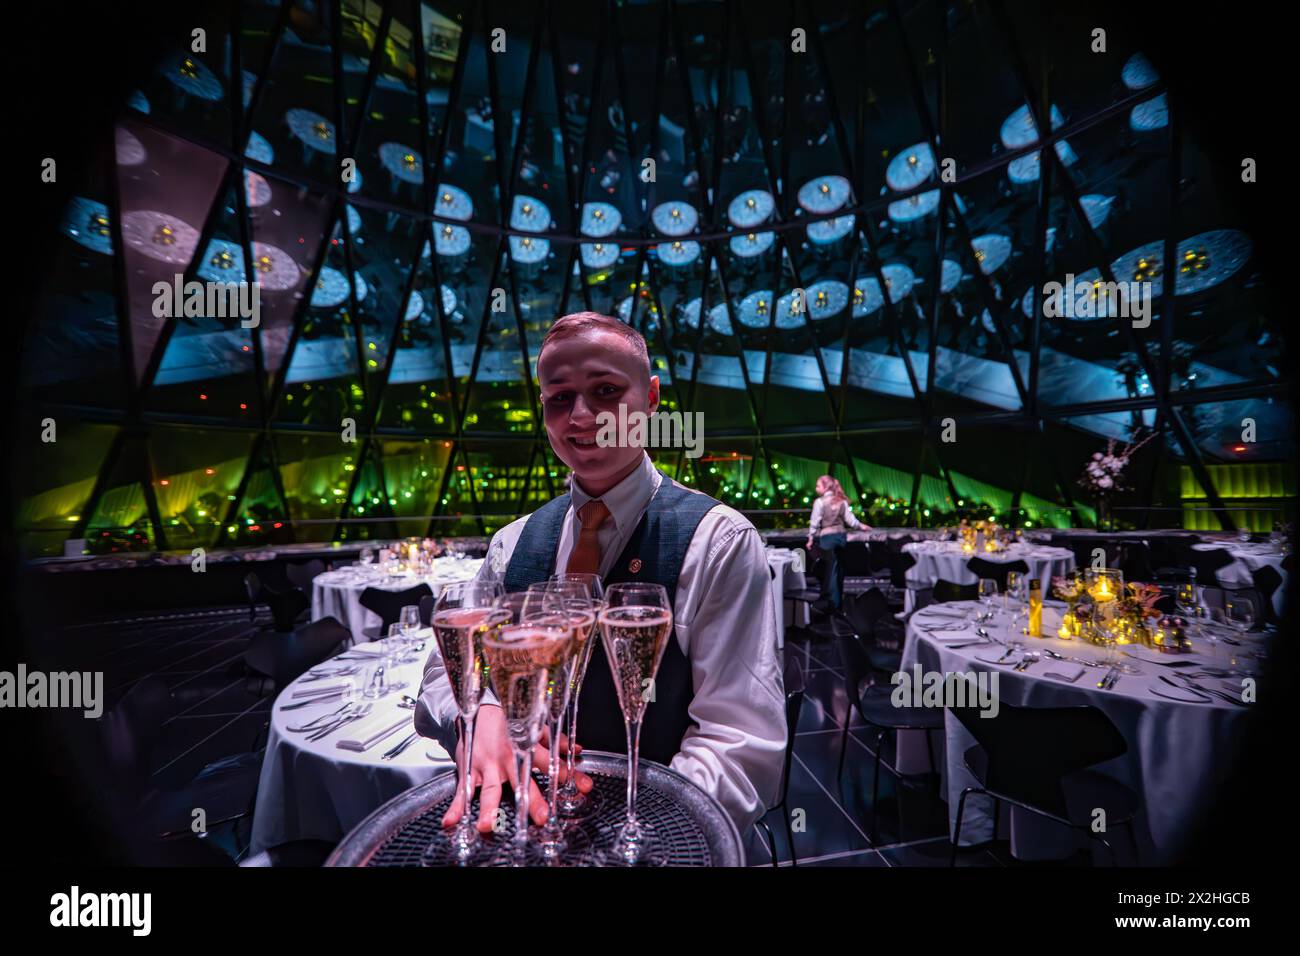 A waiter at an event at Searcys Restaurant in the Gherkin building. Photo date: Saturday, January 20, 2024. Photo: Richard Gray/Alamy Stock Photo